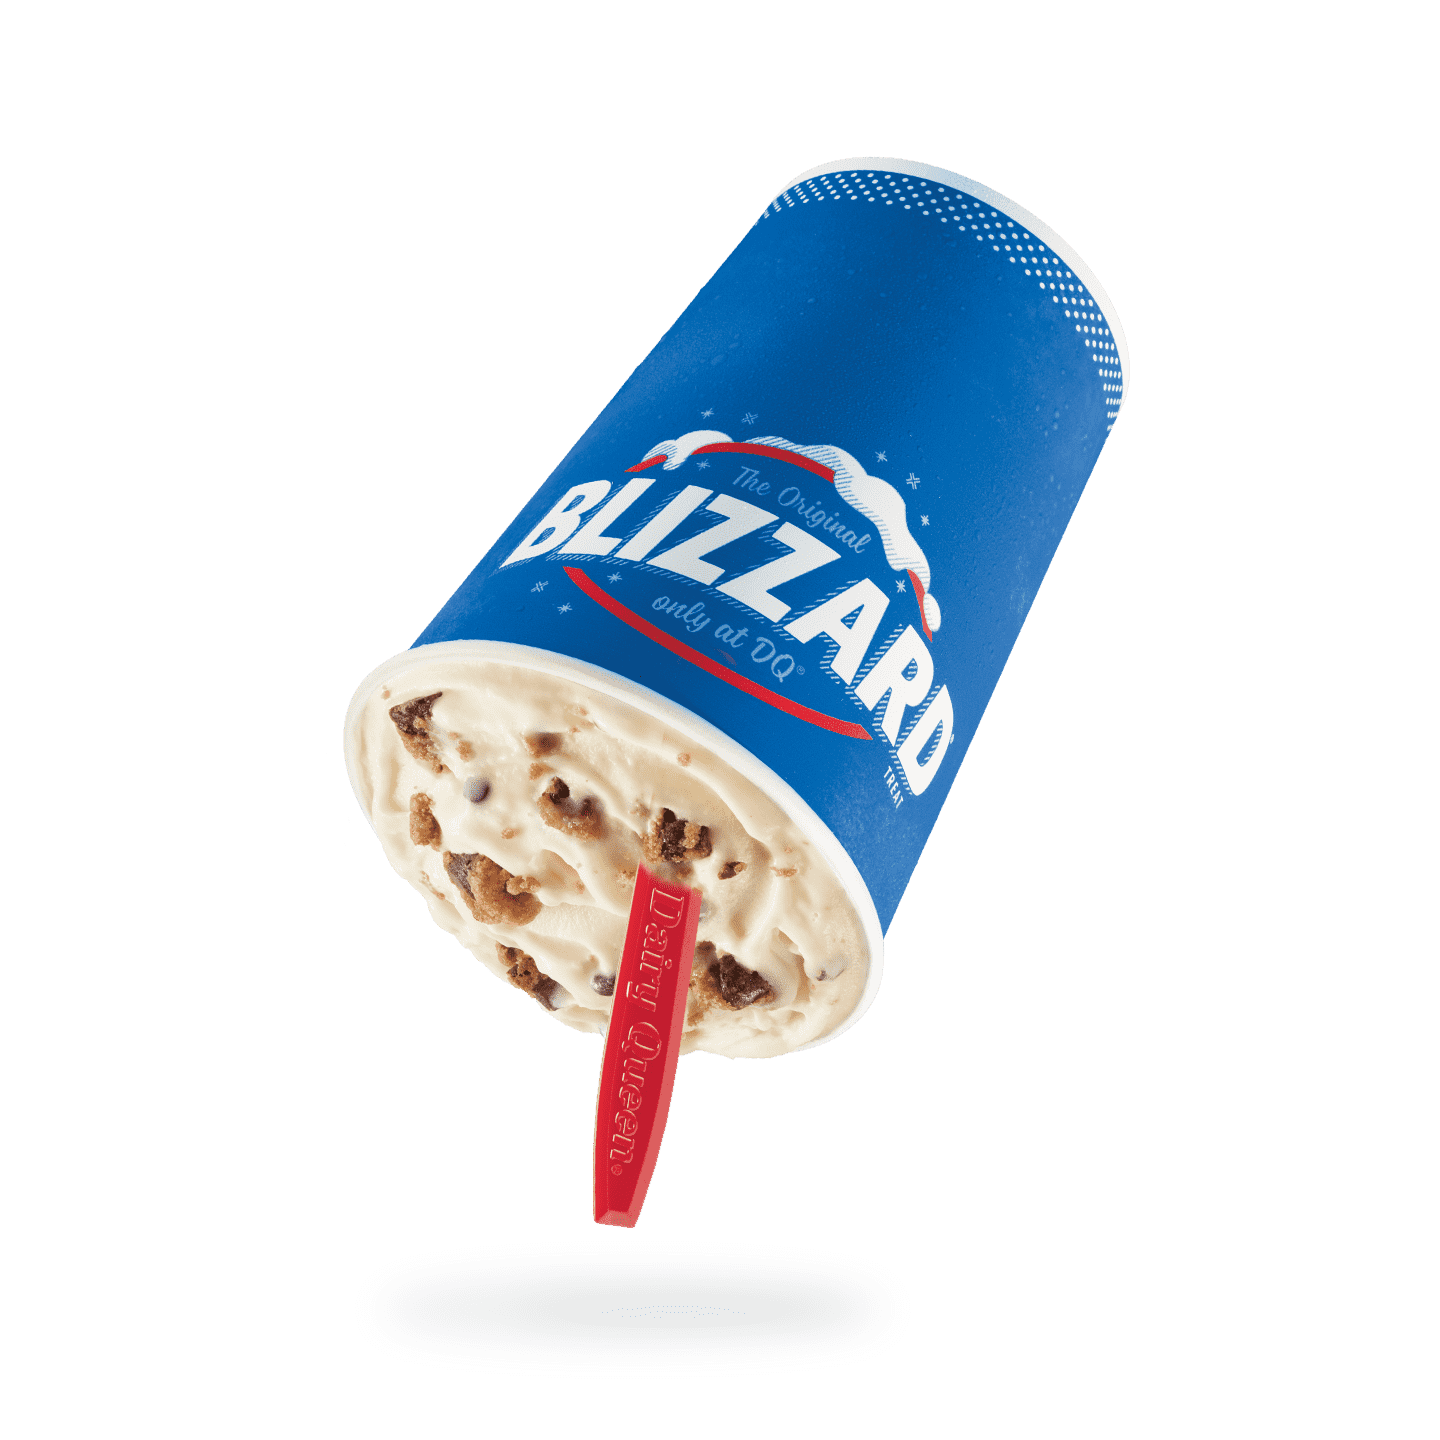 Dairy Queen Mini Nestle Toll House Chocolate Chip Cookie Blizzard Nutrition Facts